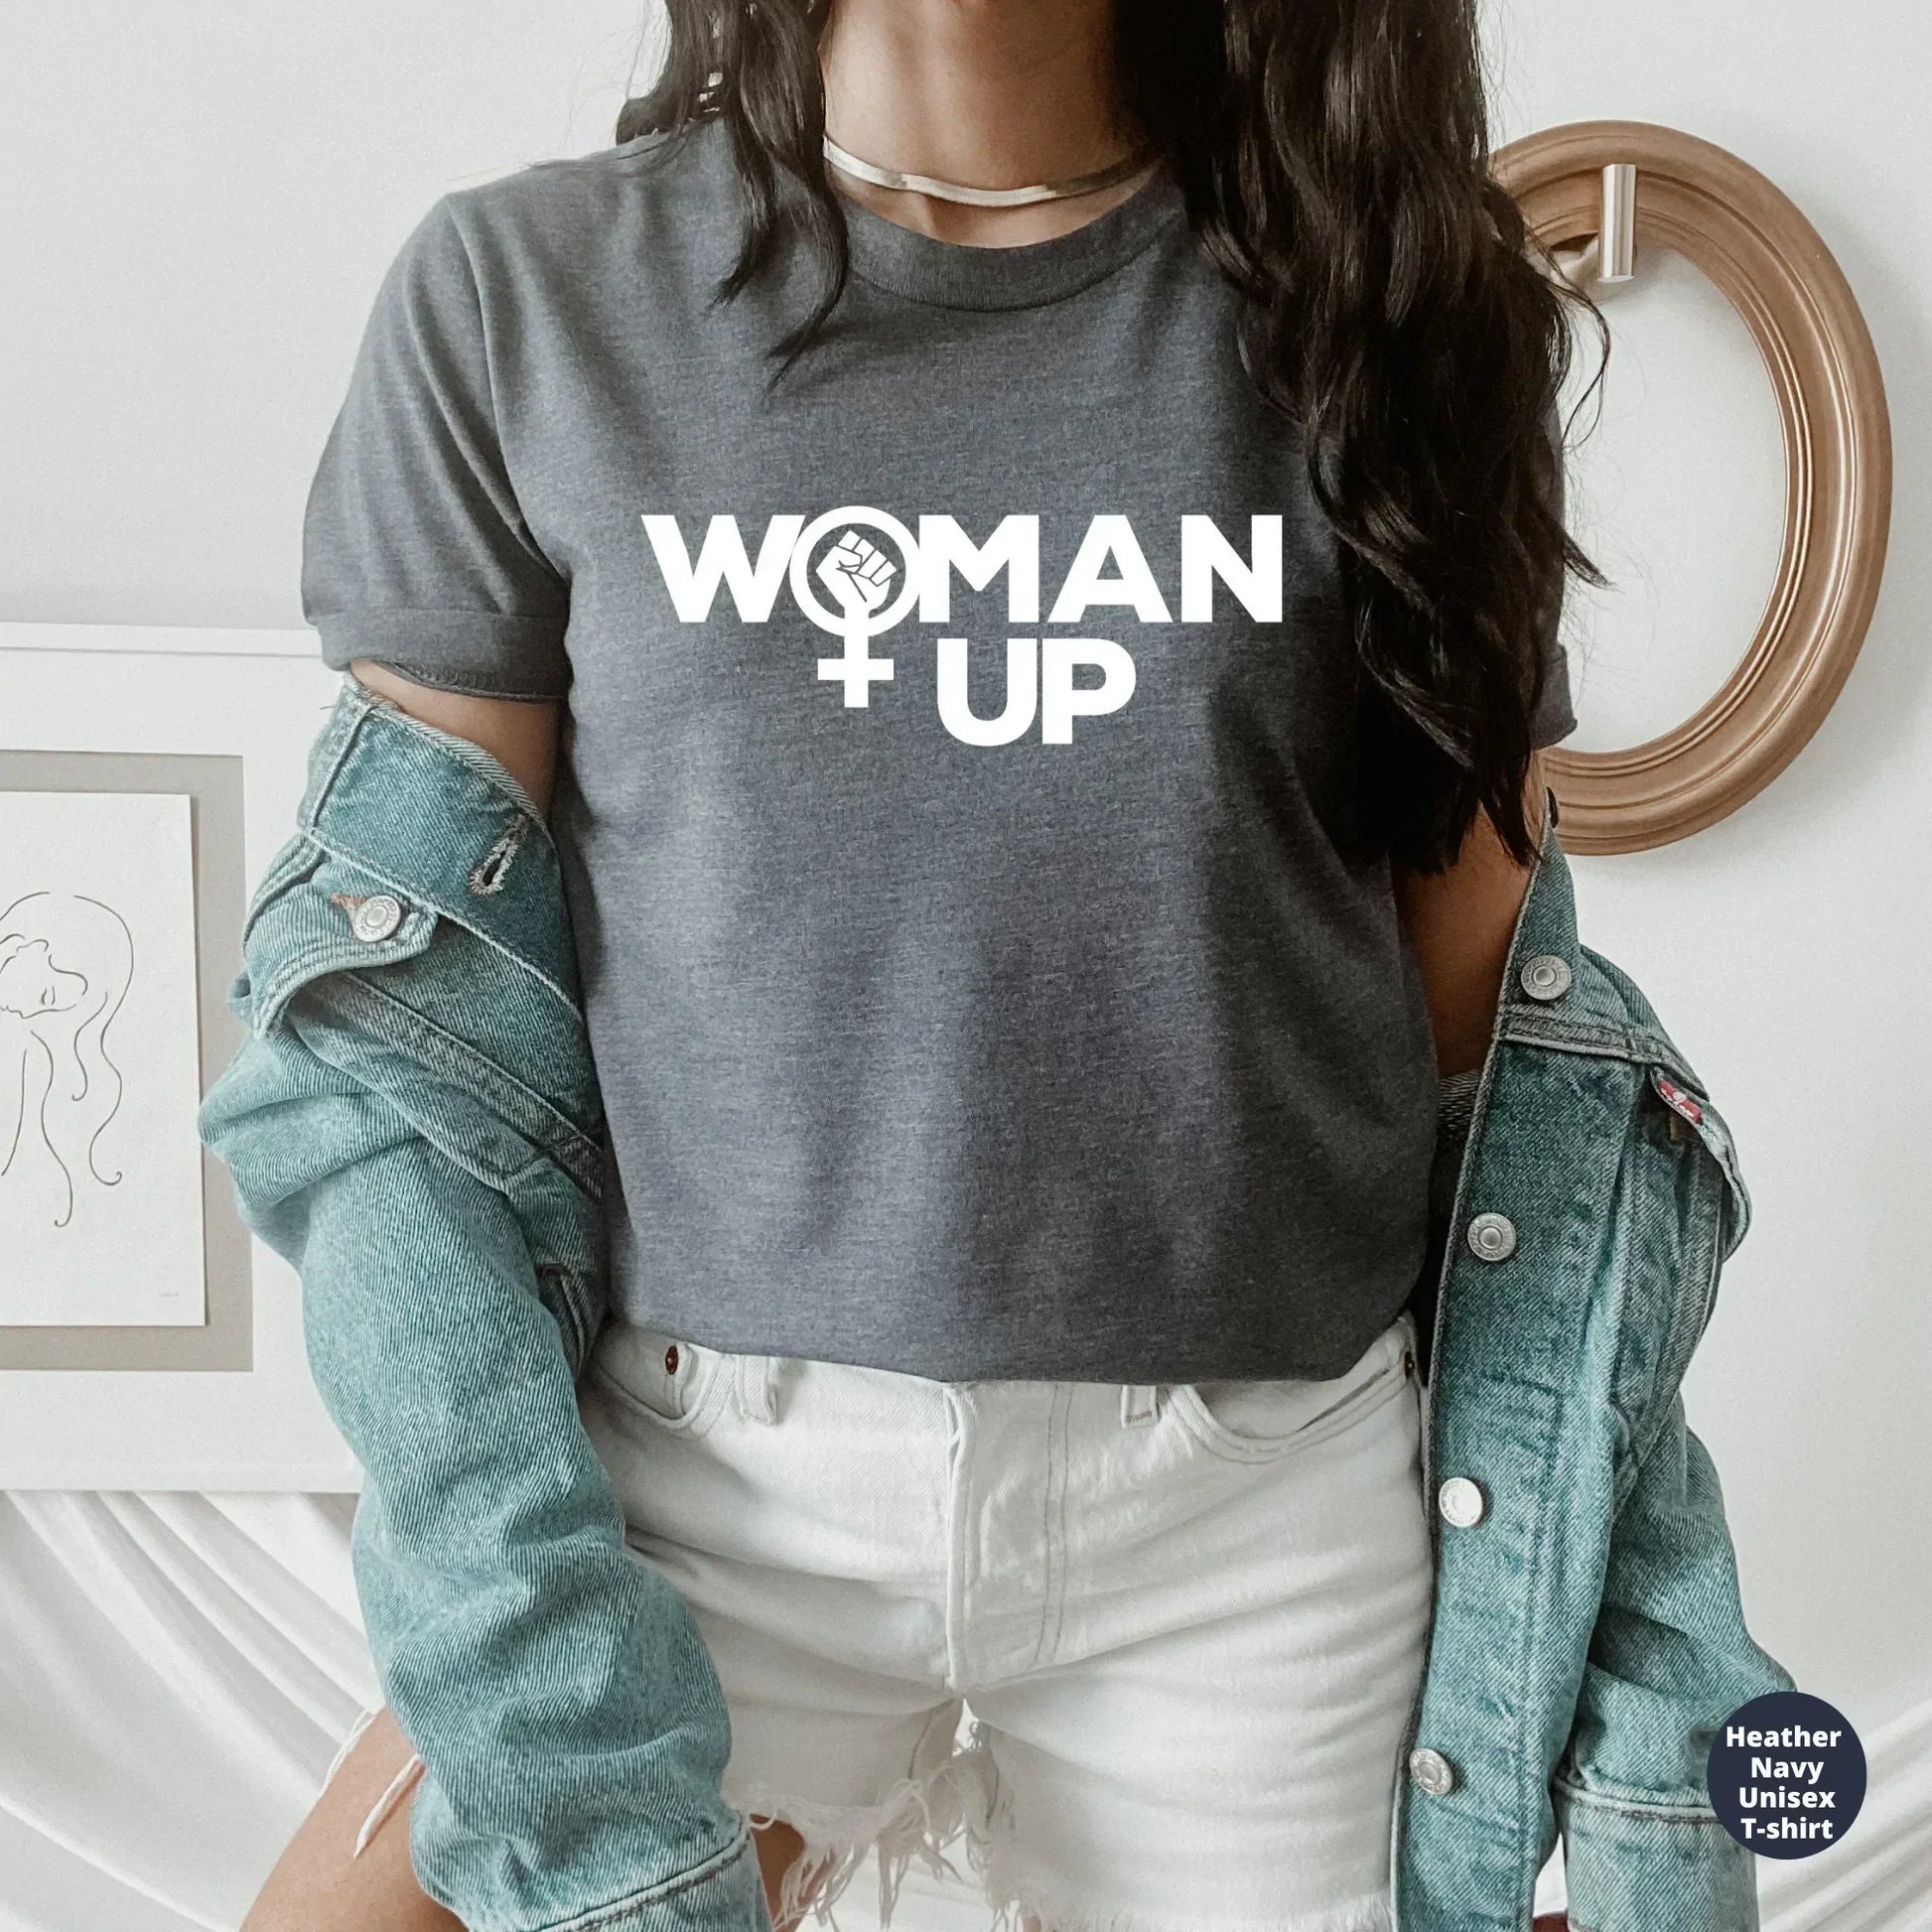 Woman Up T-shirt, Protest T-Shirt, Empower Women Rights, Female Pro Choice Shirt, Roe v Wade, Activist, Equality Sweatshirt, Feminist Hoodie